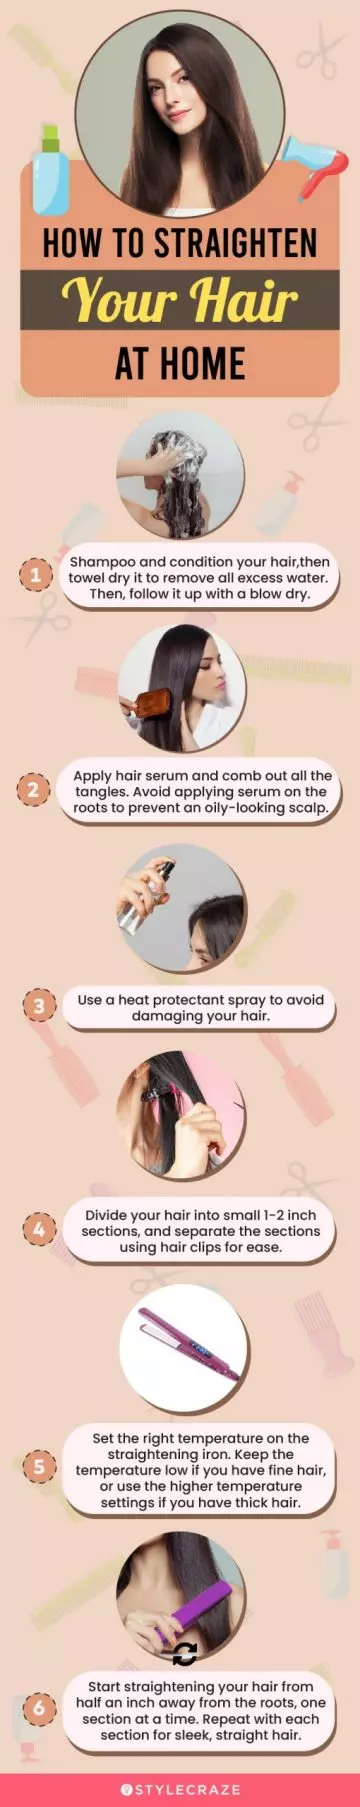 how to straighten your hair at home (infographic)